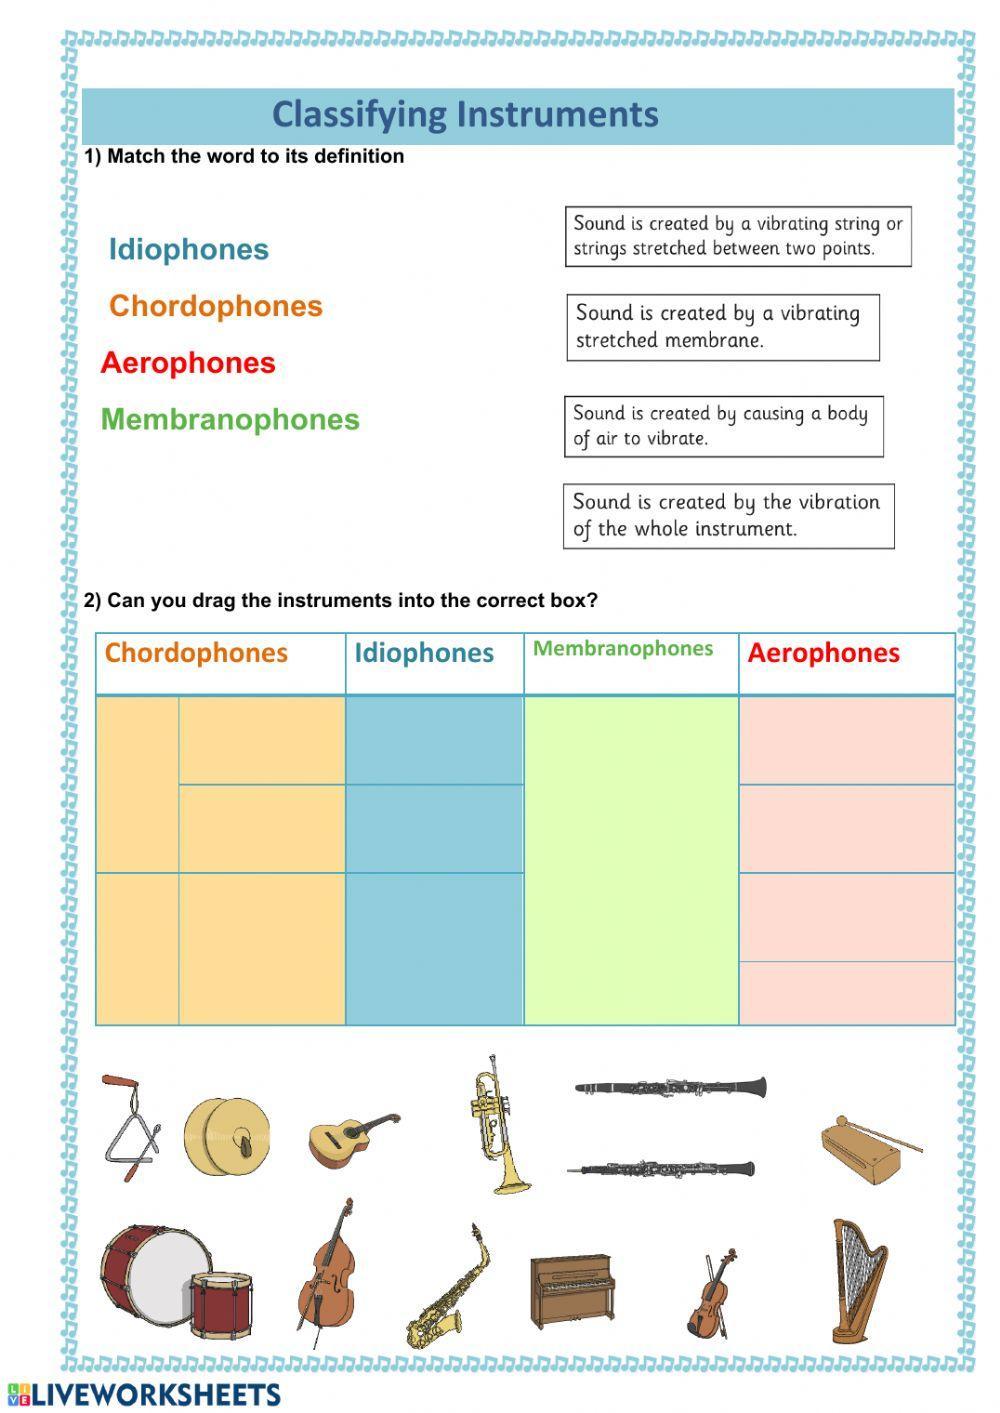 Classifying musical instruments